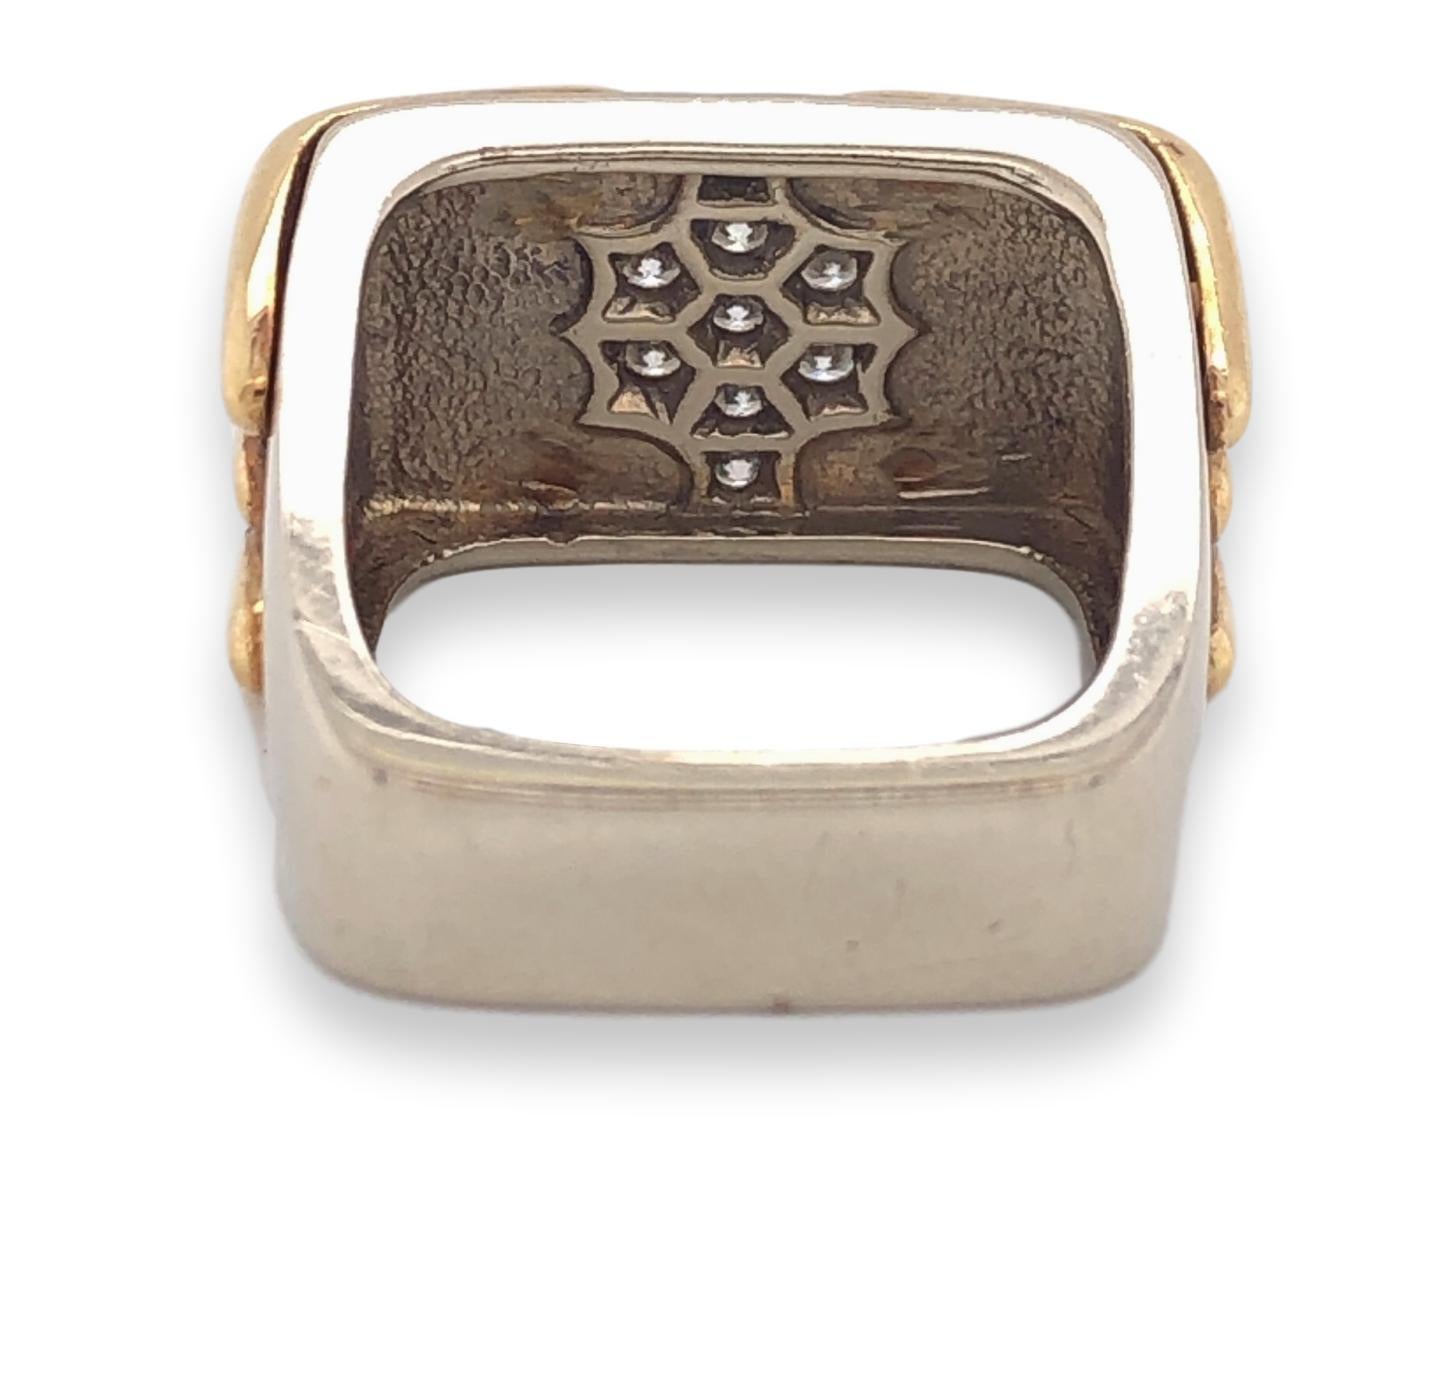 Brilliant Cut 1970s White and Yellow Gold Art Deco Style Ring